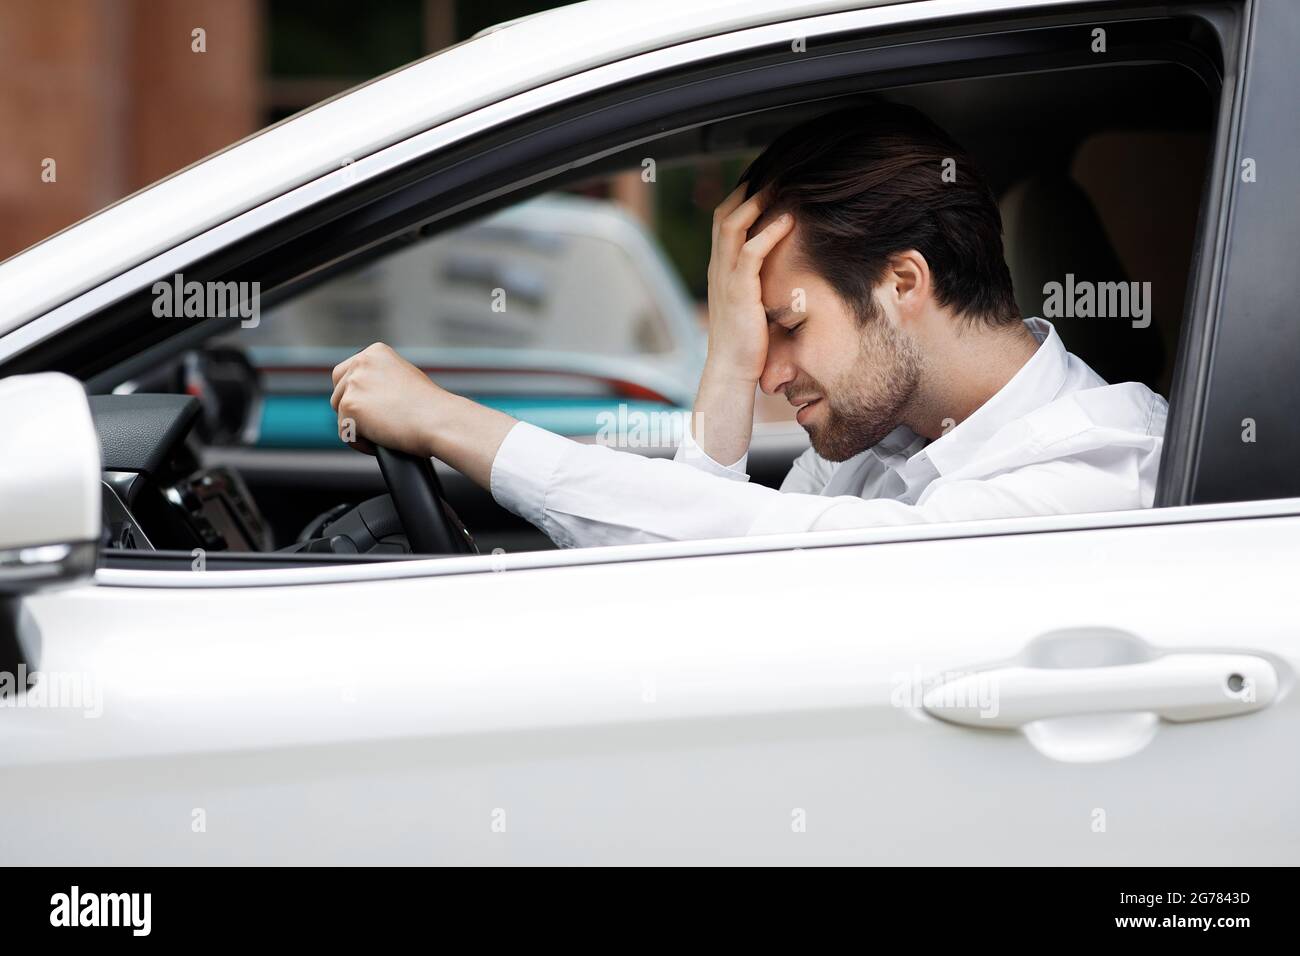 Upset driver, stressful situations on road and fast rhythm in modern city Stock Photo